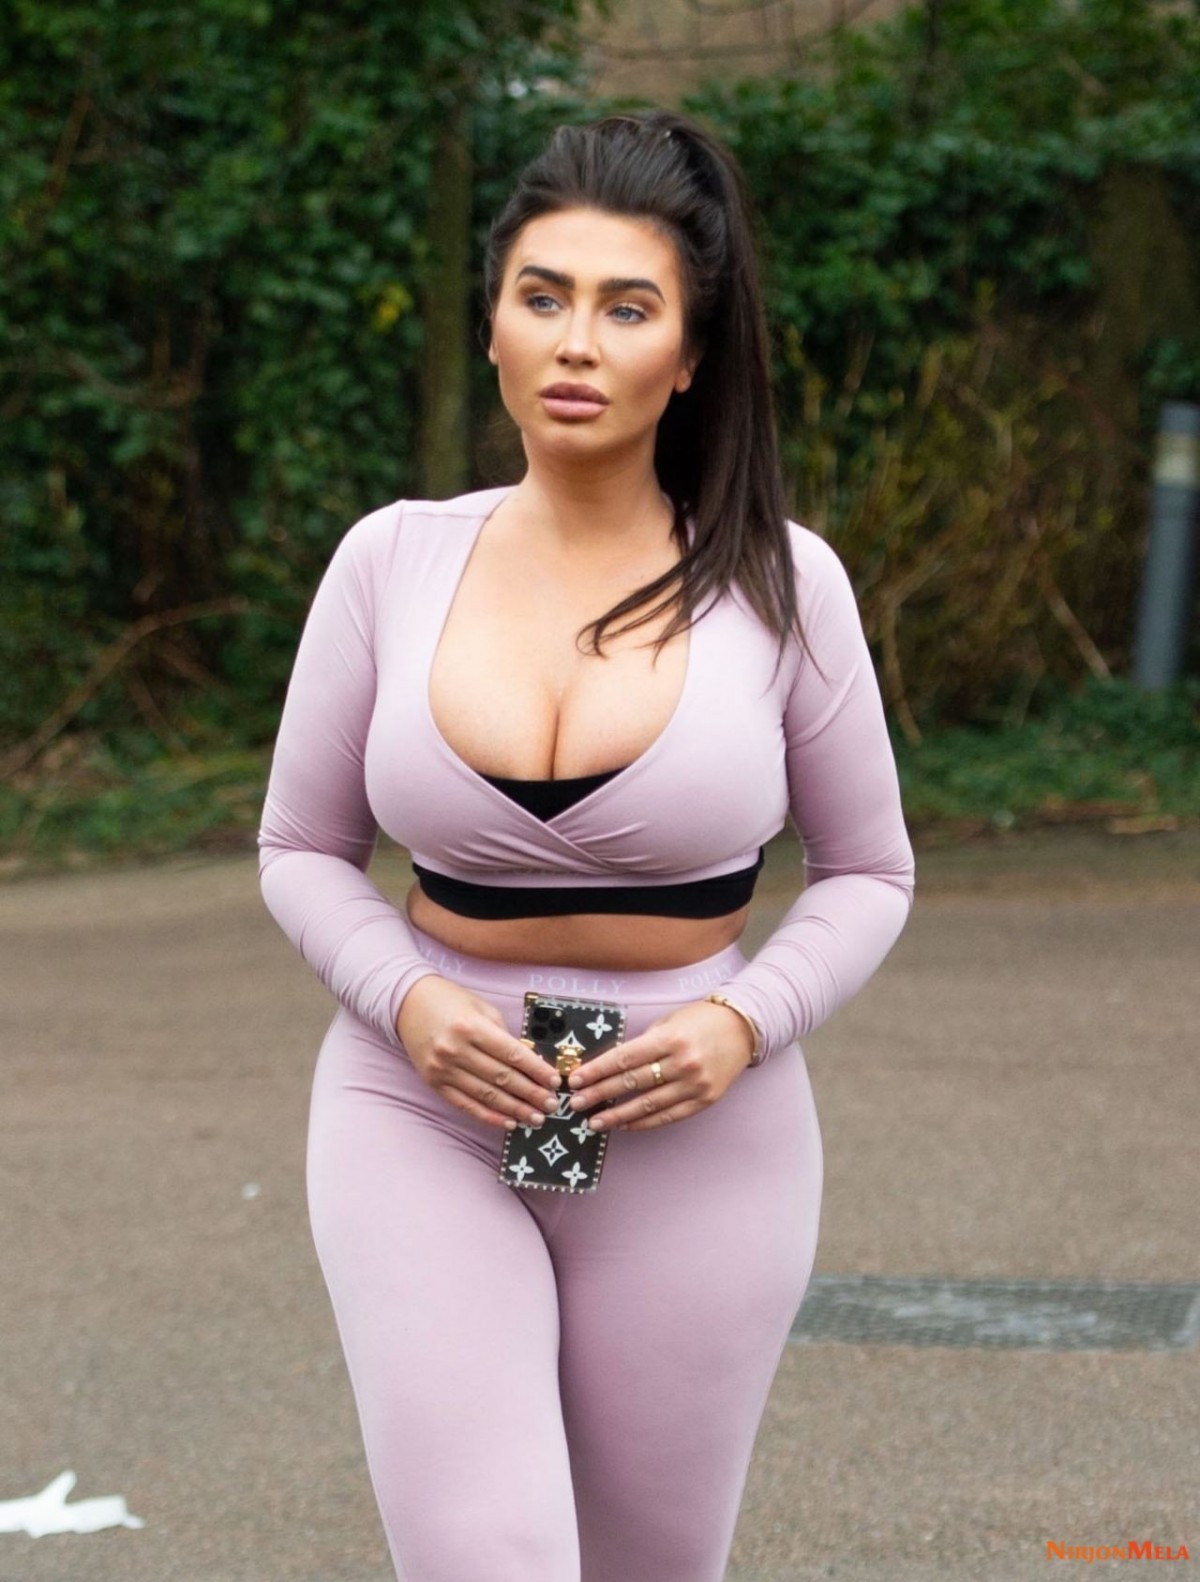 lauren-goodger-in-tiny-crop-top-and-leggings-out-for-a-morning-run-04-23-2020-1.jpg